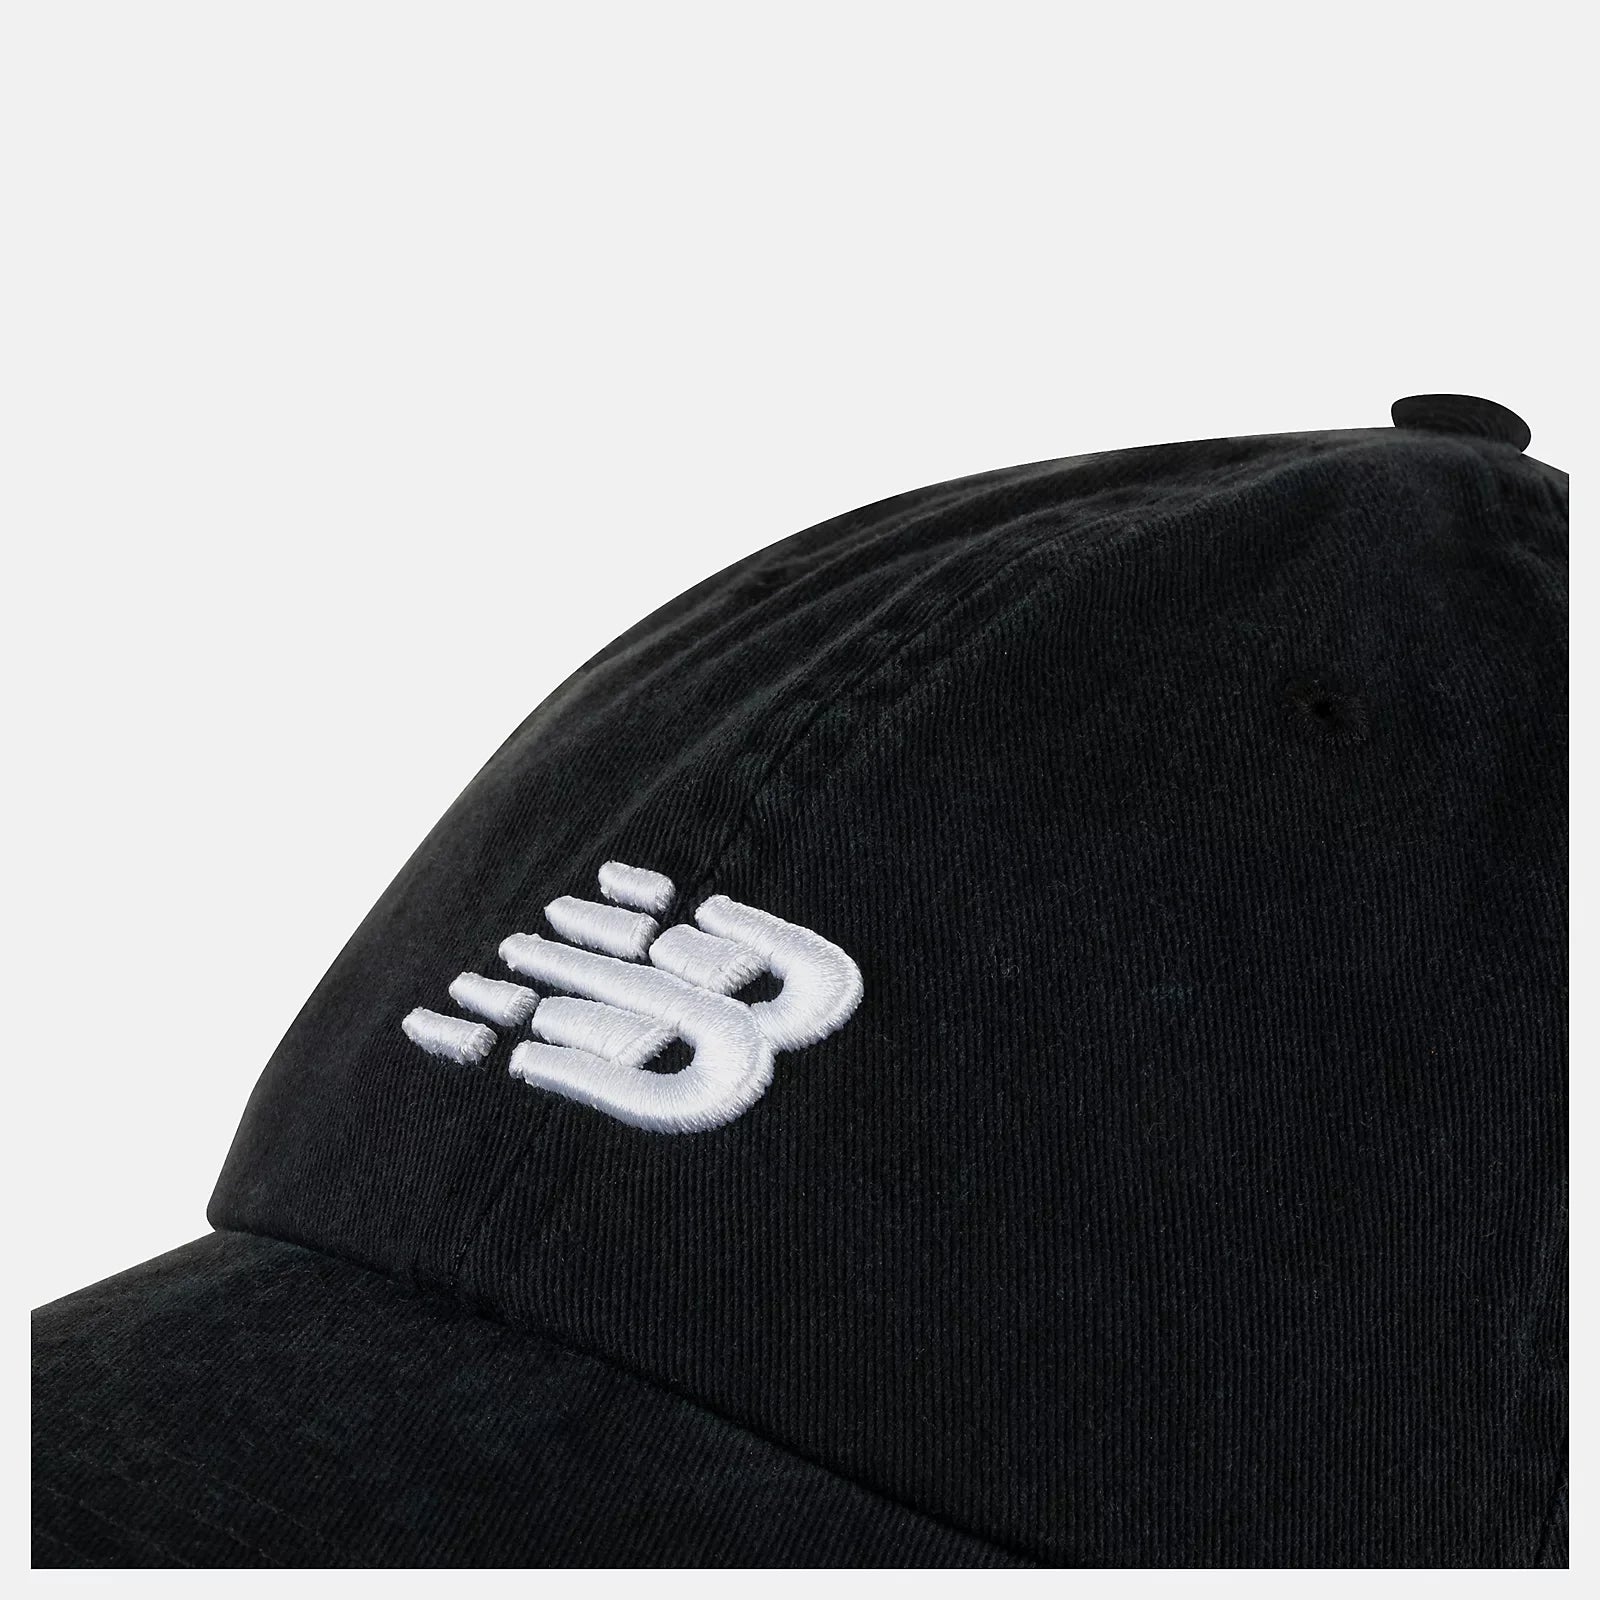 NEW BALANCE 6-Panel Curved Brim NB Classic Hat in Black LAH91014 O/S BLACK FROM EIGHTYWINGOLD - OFFICIAL BRAND PARTNER